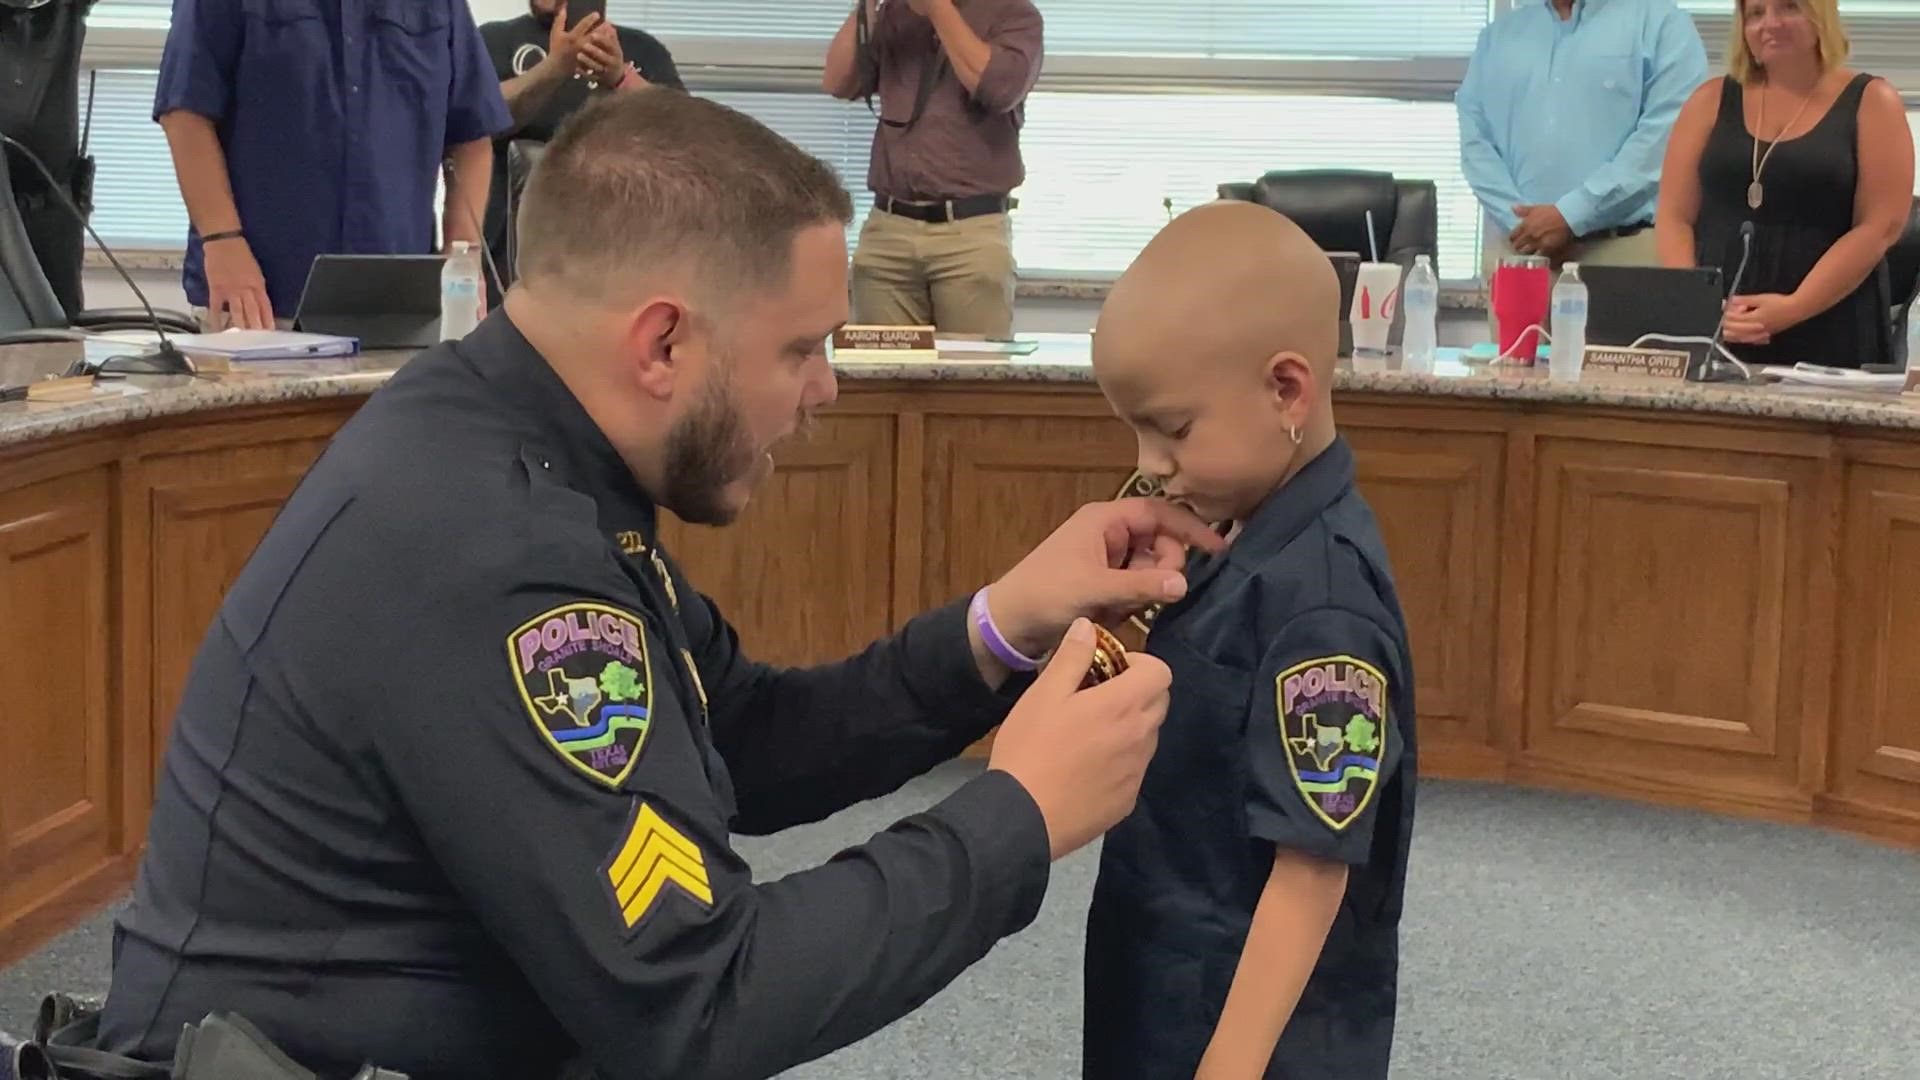 Isabella, who is in her second battle with neuroblastoma, is now the newest officer in town.